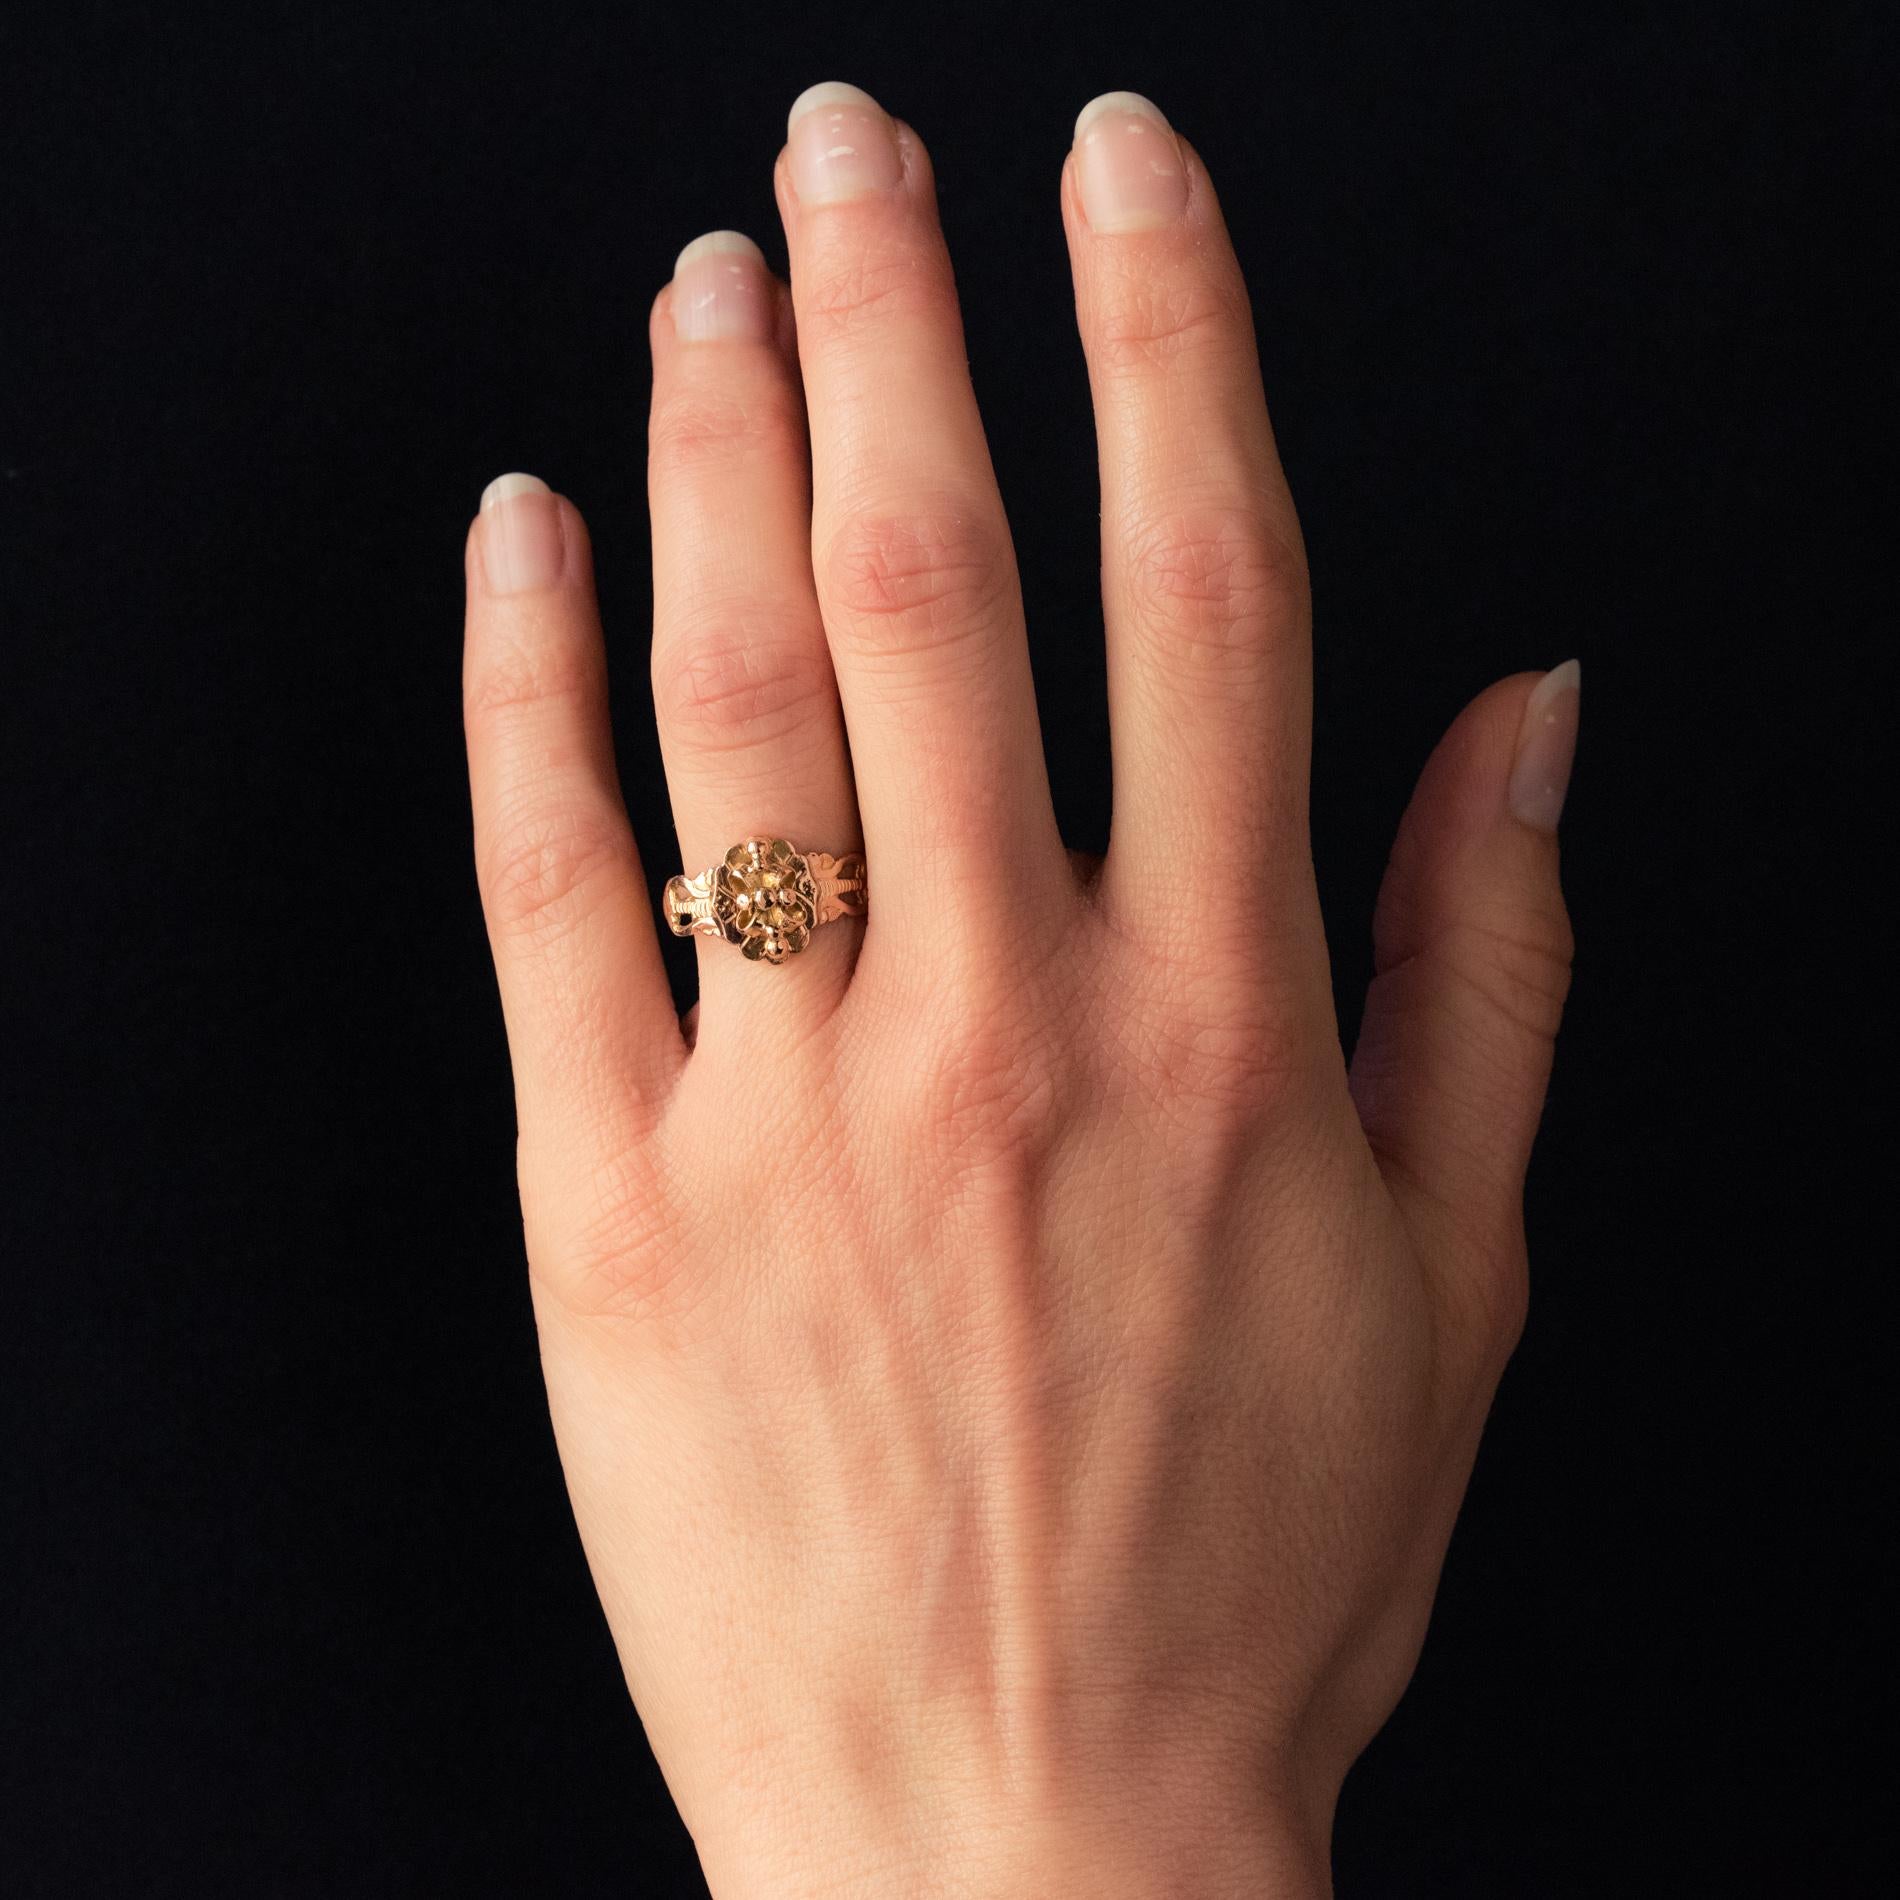 Ring in 18 karat rose gold.
Feminine antique ring, its setting consists of a thin, chiseled and perforated plate, decorated with a knot on applique with small gold pearls. On both sides, the departure of the ring has a motif in lyres.
Height: 11.3